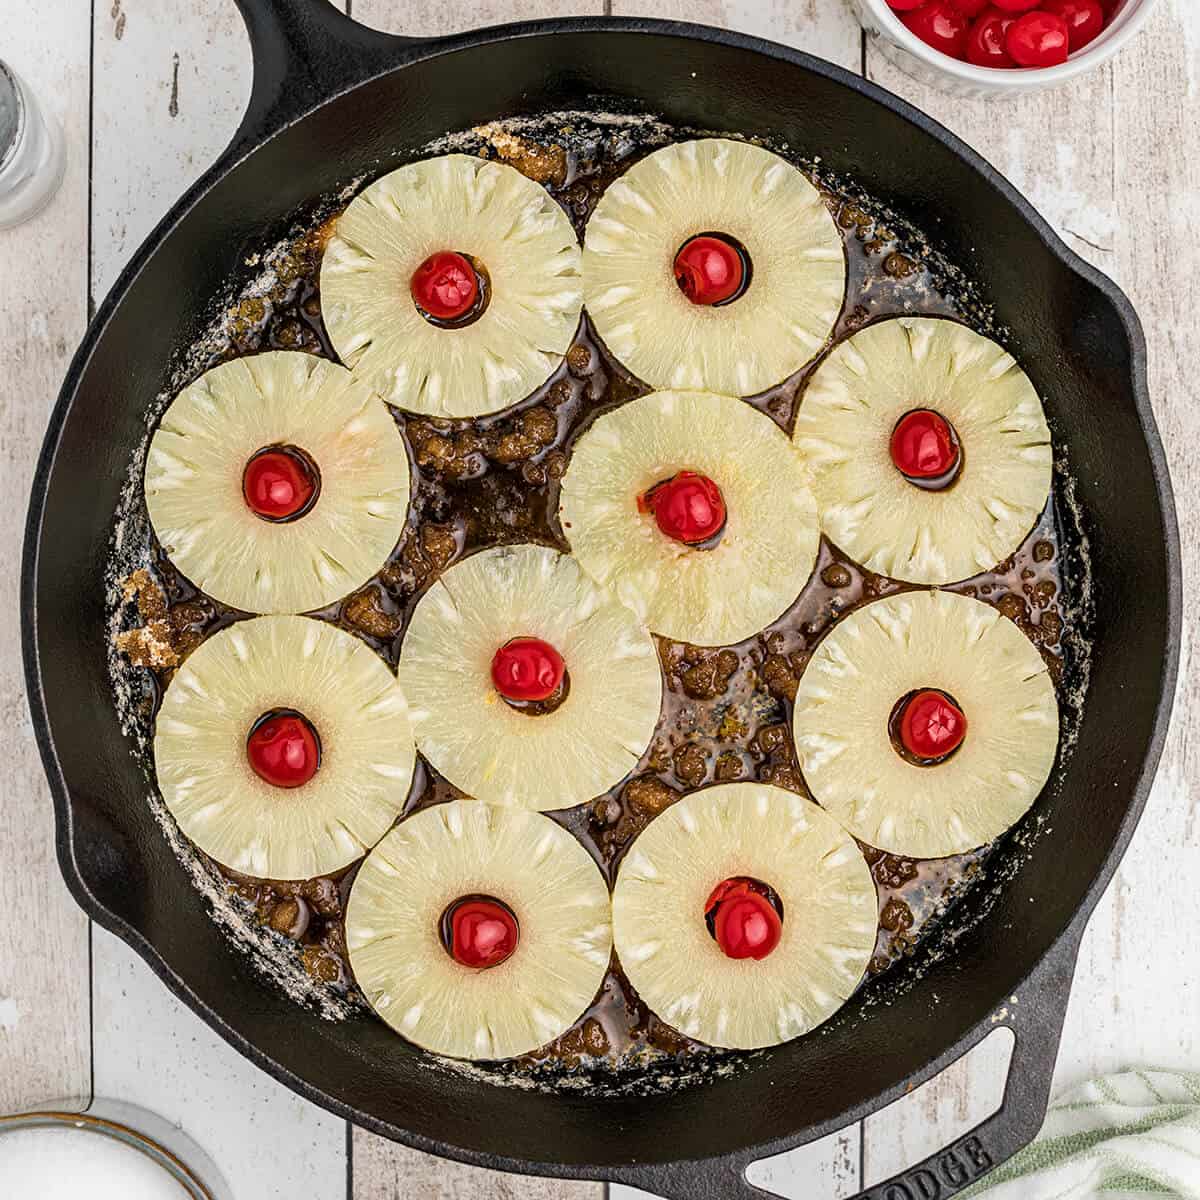 Cherries placed in the center of pineapple rings in a skillet.